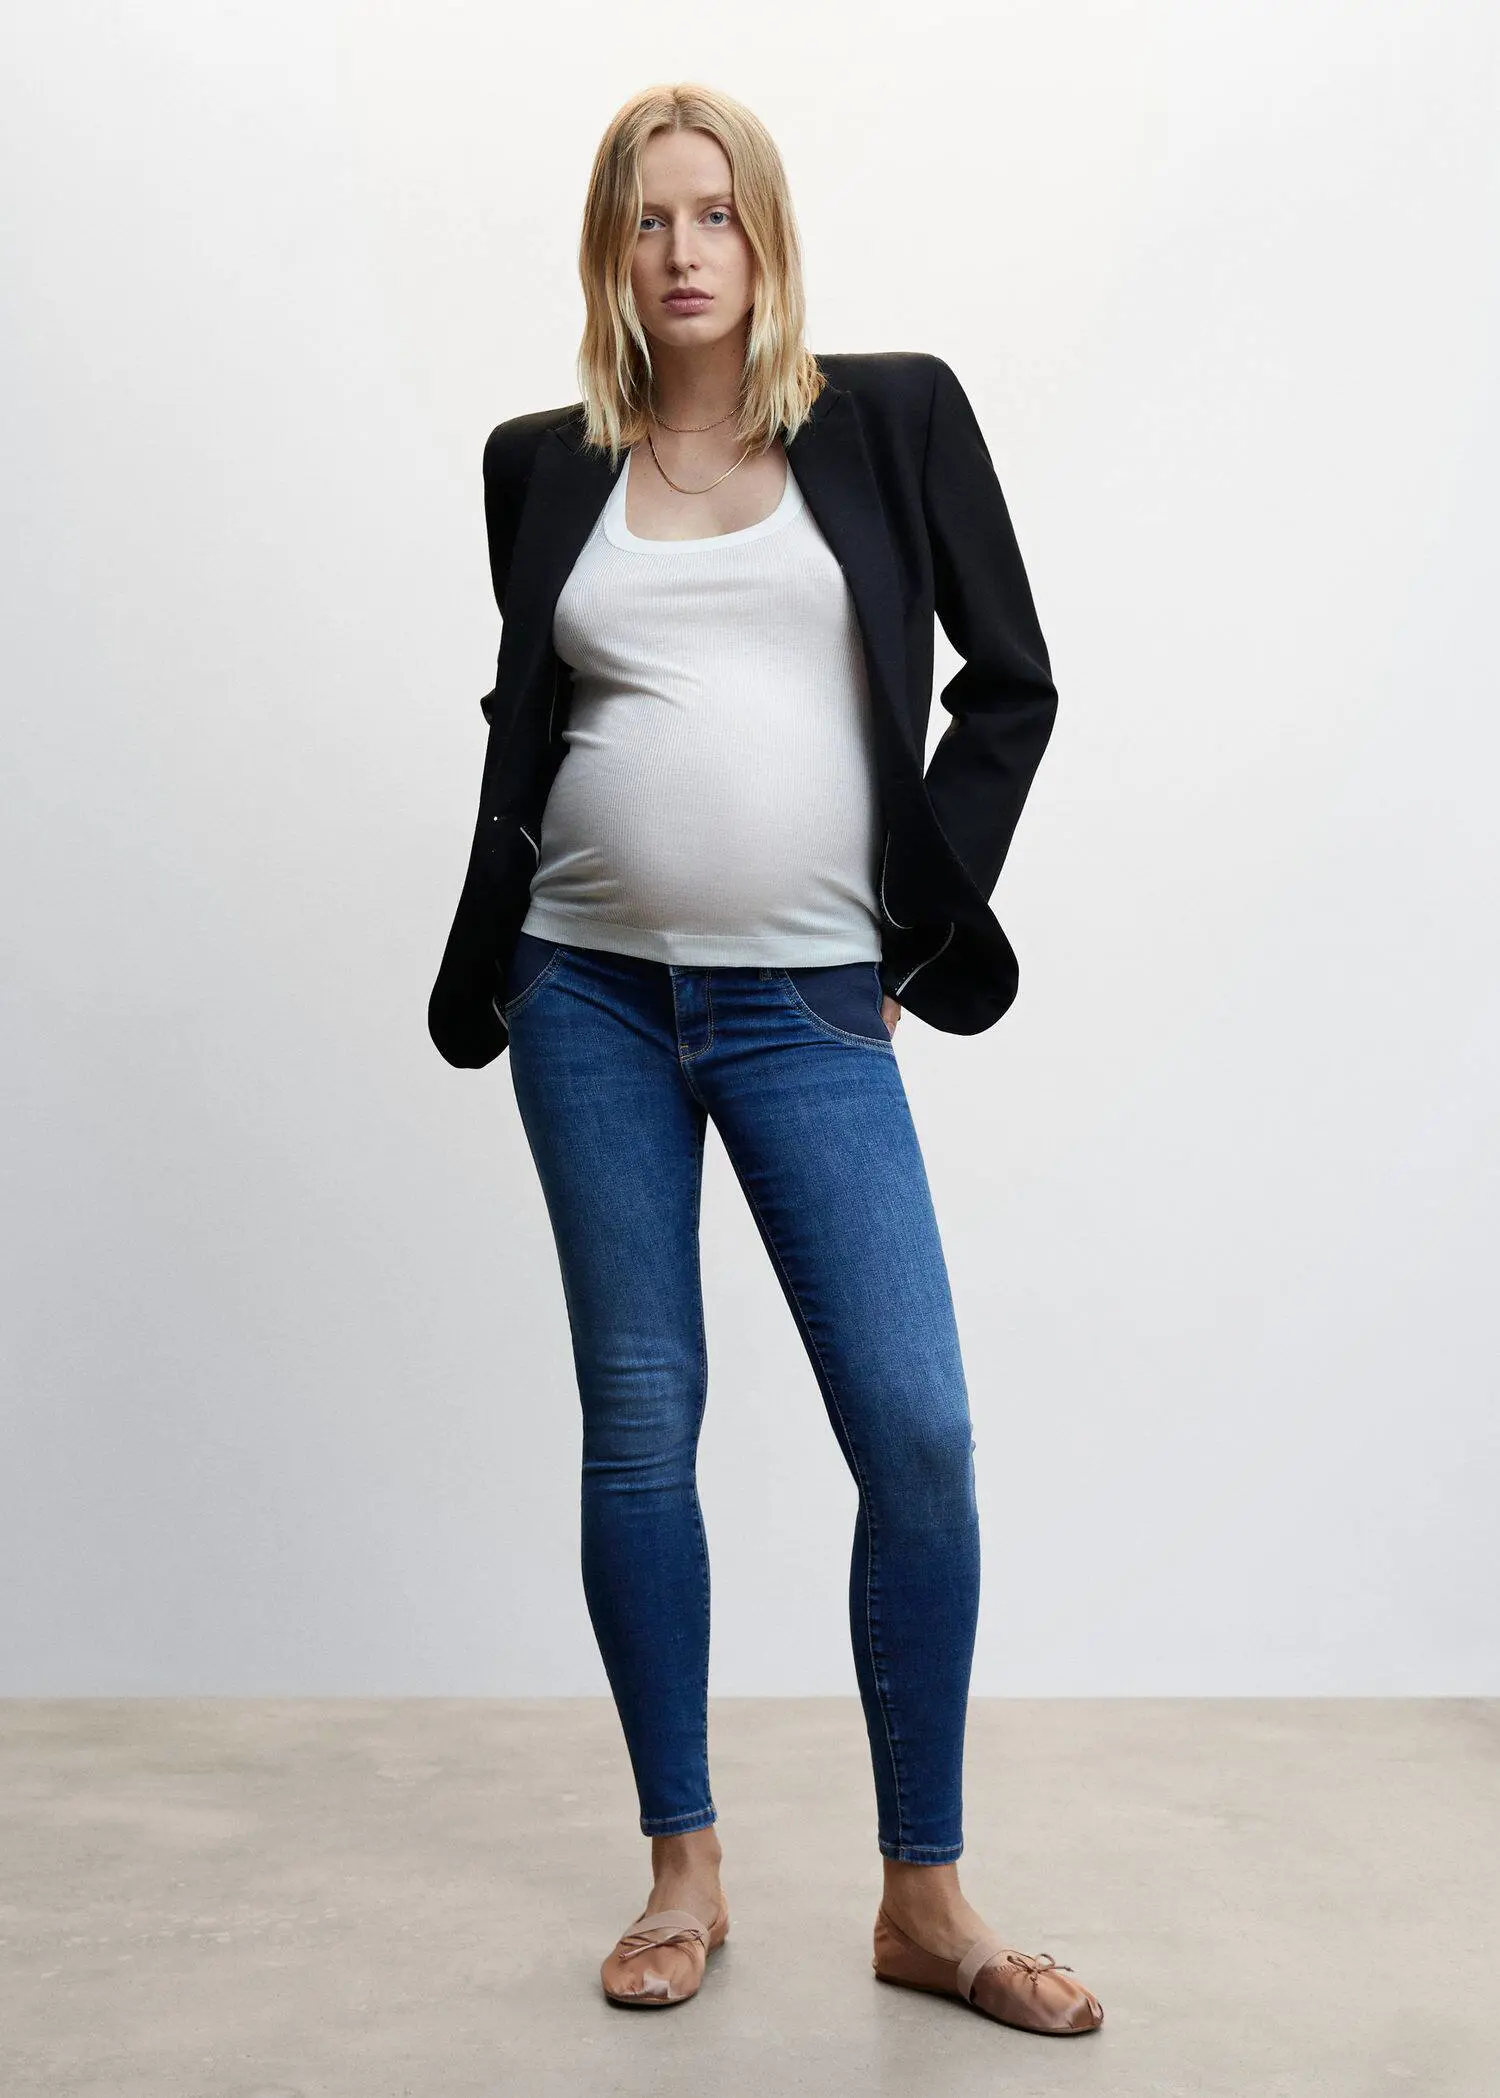 Mango Maternity skinny jeans. a pregnant woman wearing jeans and a jacket. 